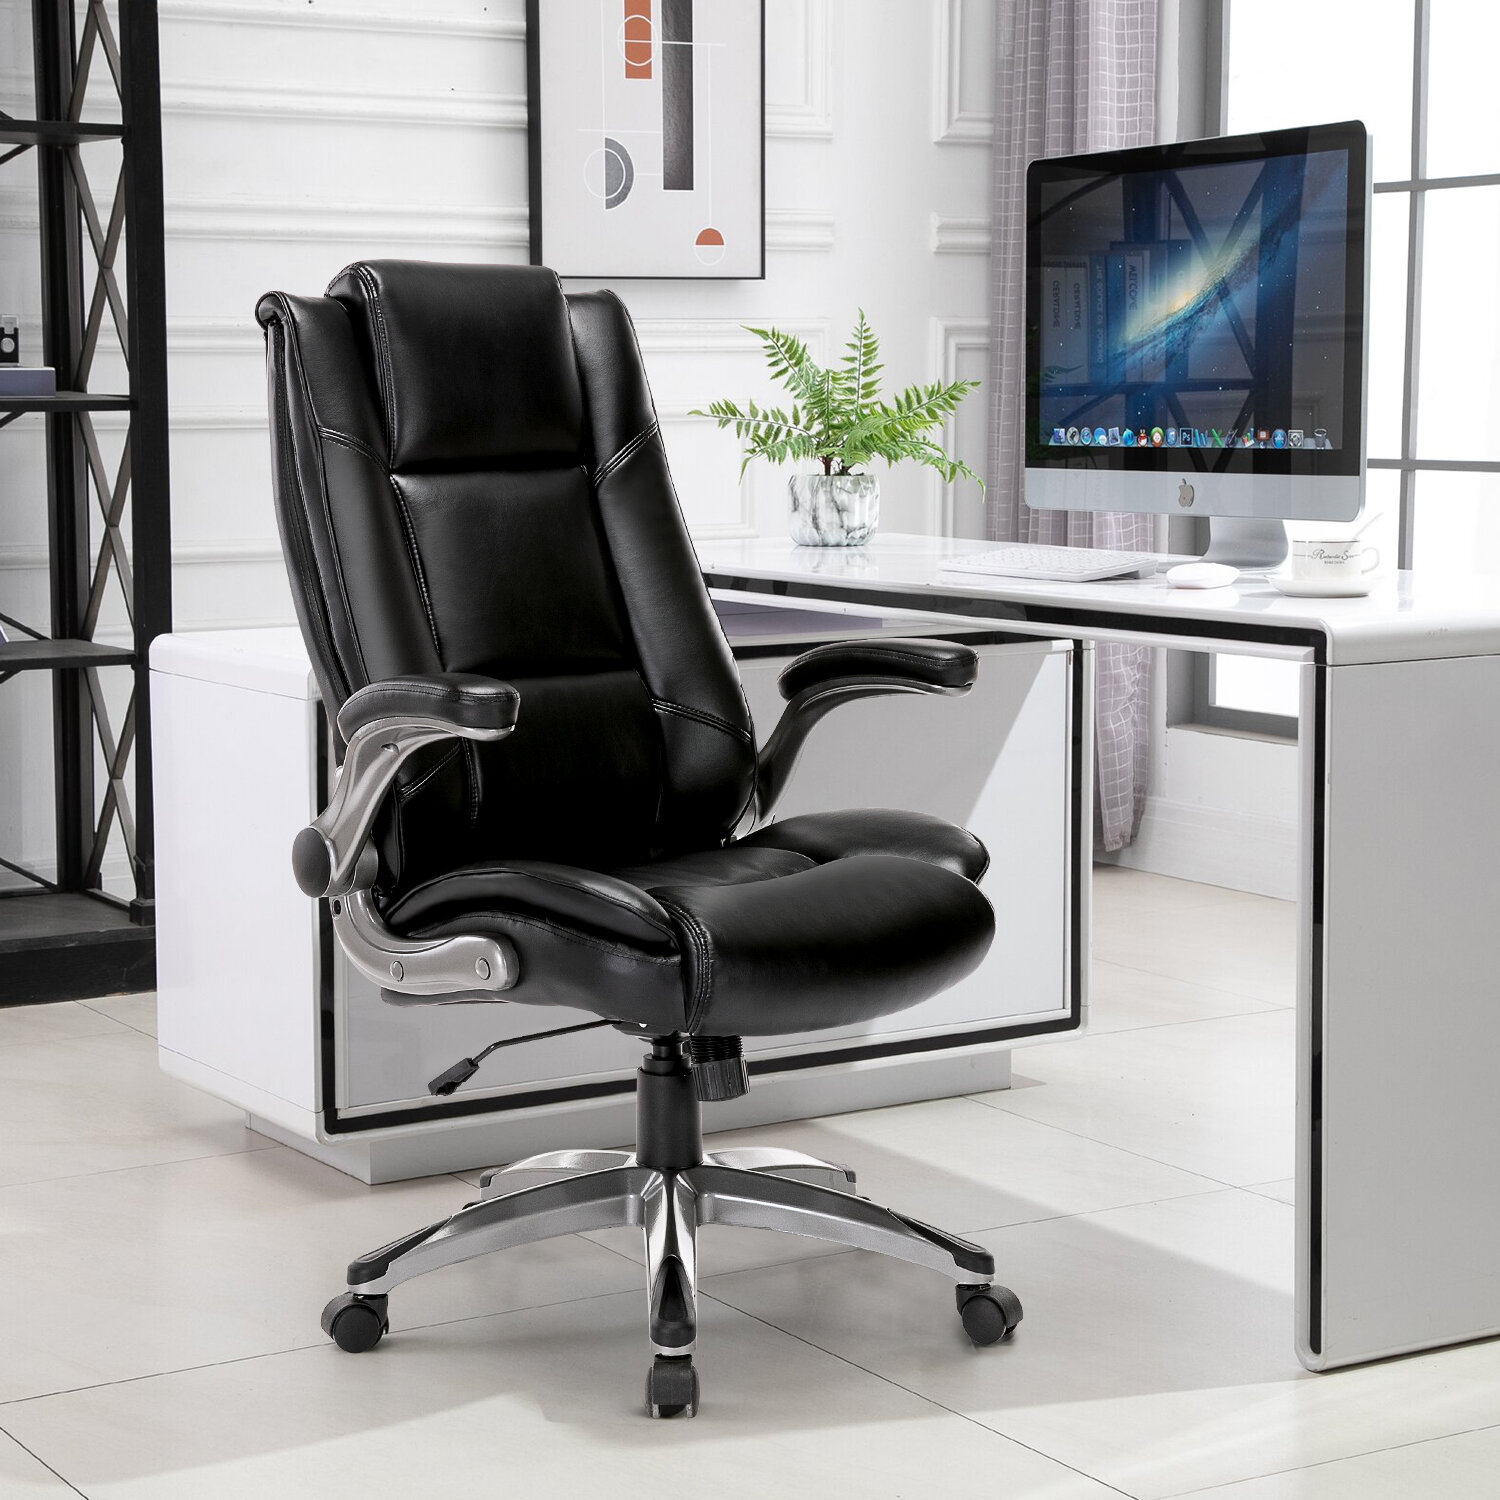 Inbox Zero Office Chair High Back Leather Executive Computer Desk Chair Flip Up Arms And Adjustable Tilt Angle Swivel Chair Thick Padding For Comfort And Ergonomic Design For Lumbar Support Wayfair